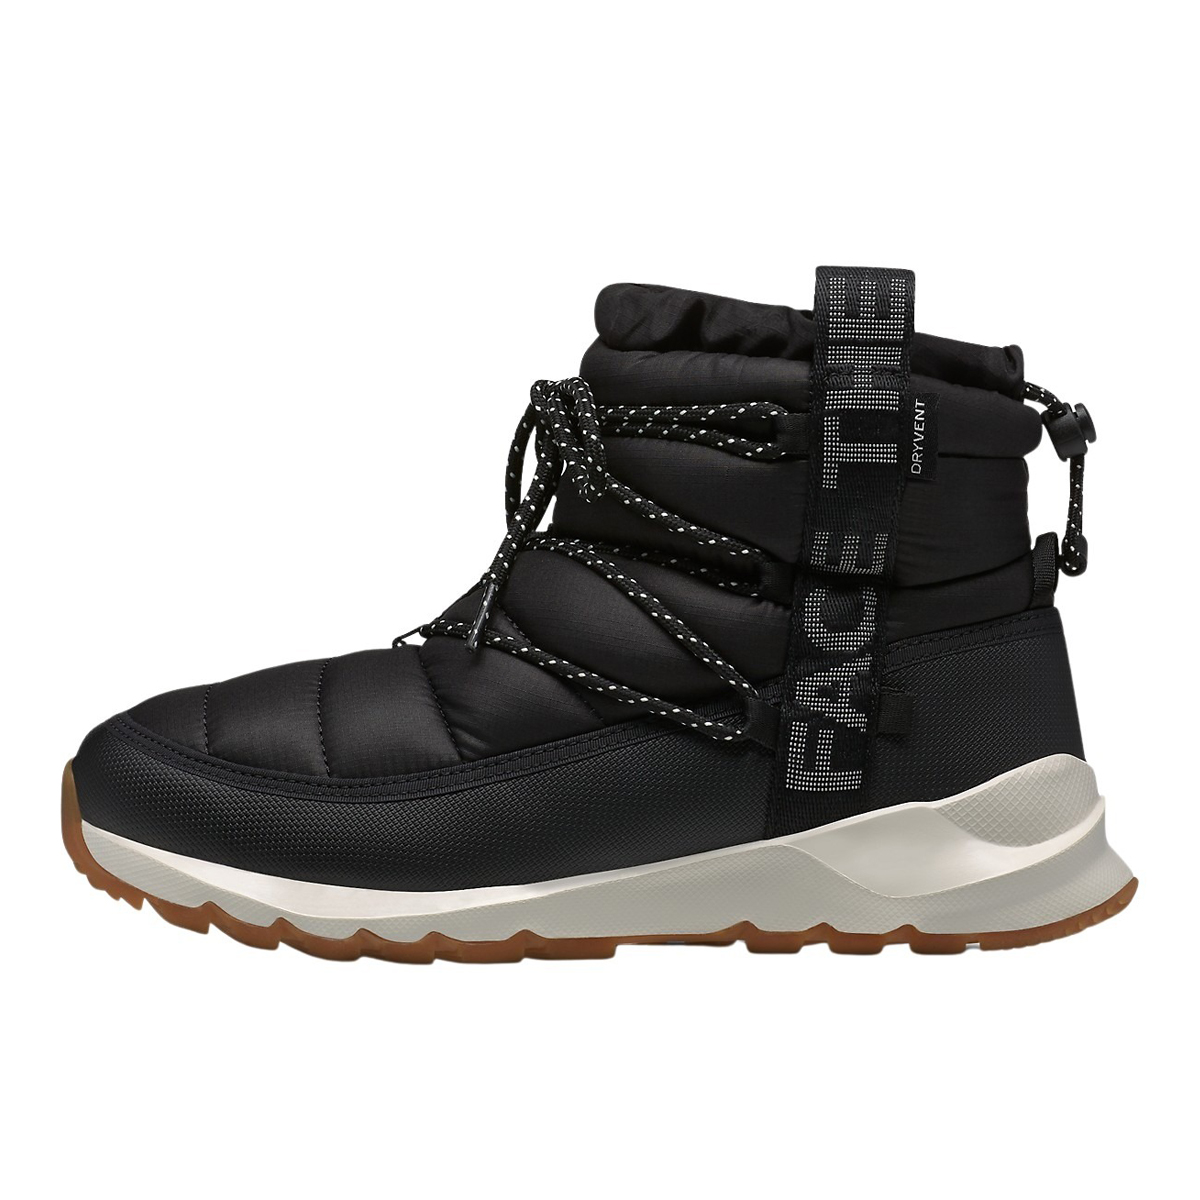 Women’s ThermoBall Lace Up Waterproof Boots